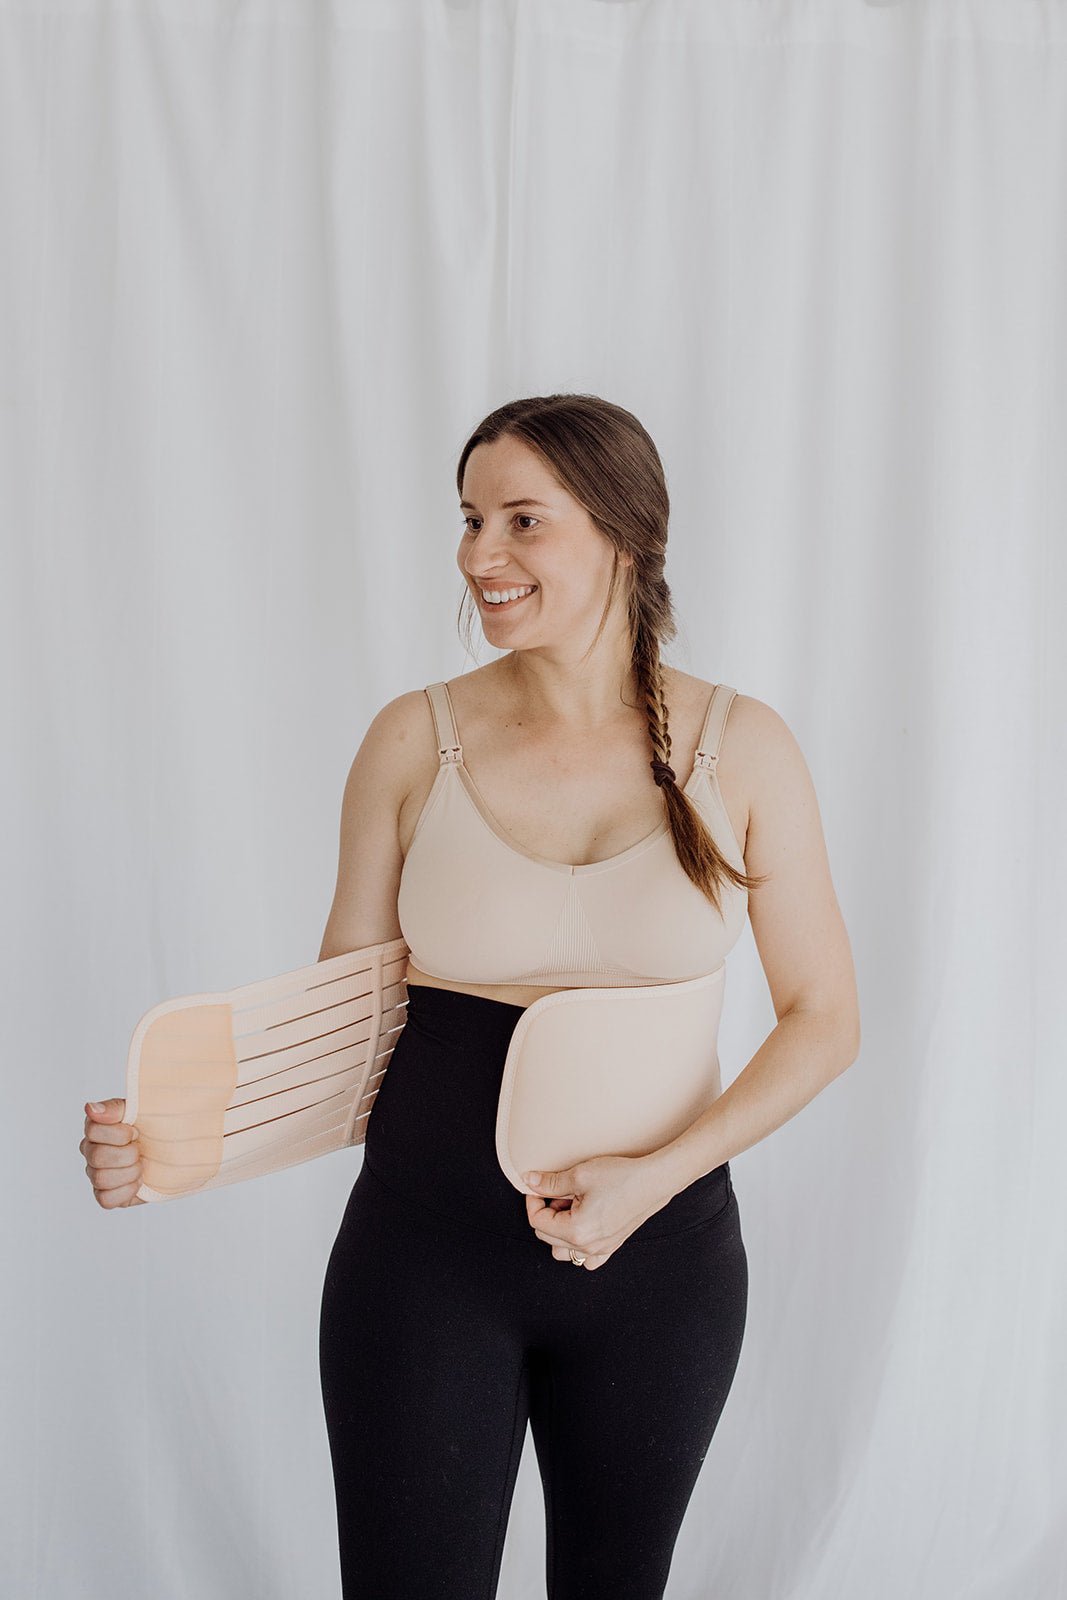 Round Ligament Support Kit for Pregnancy Pain Relief